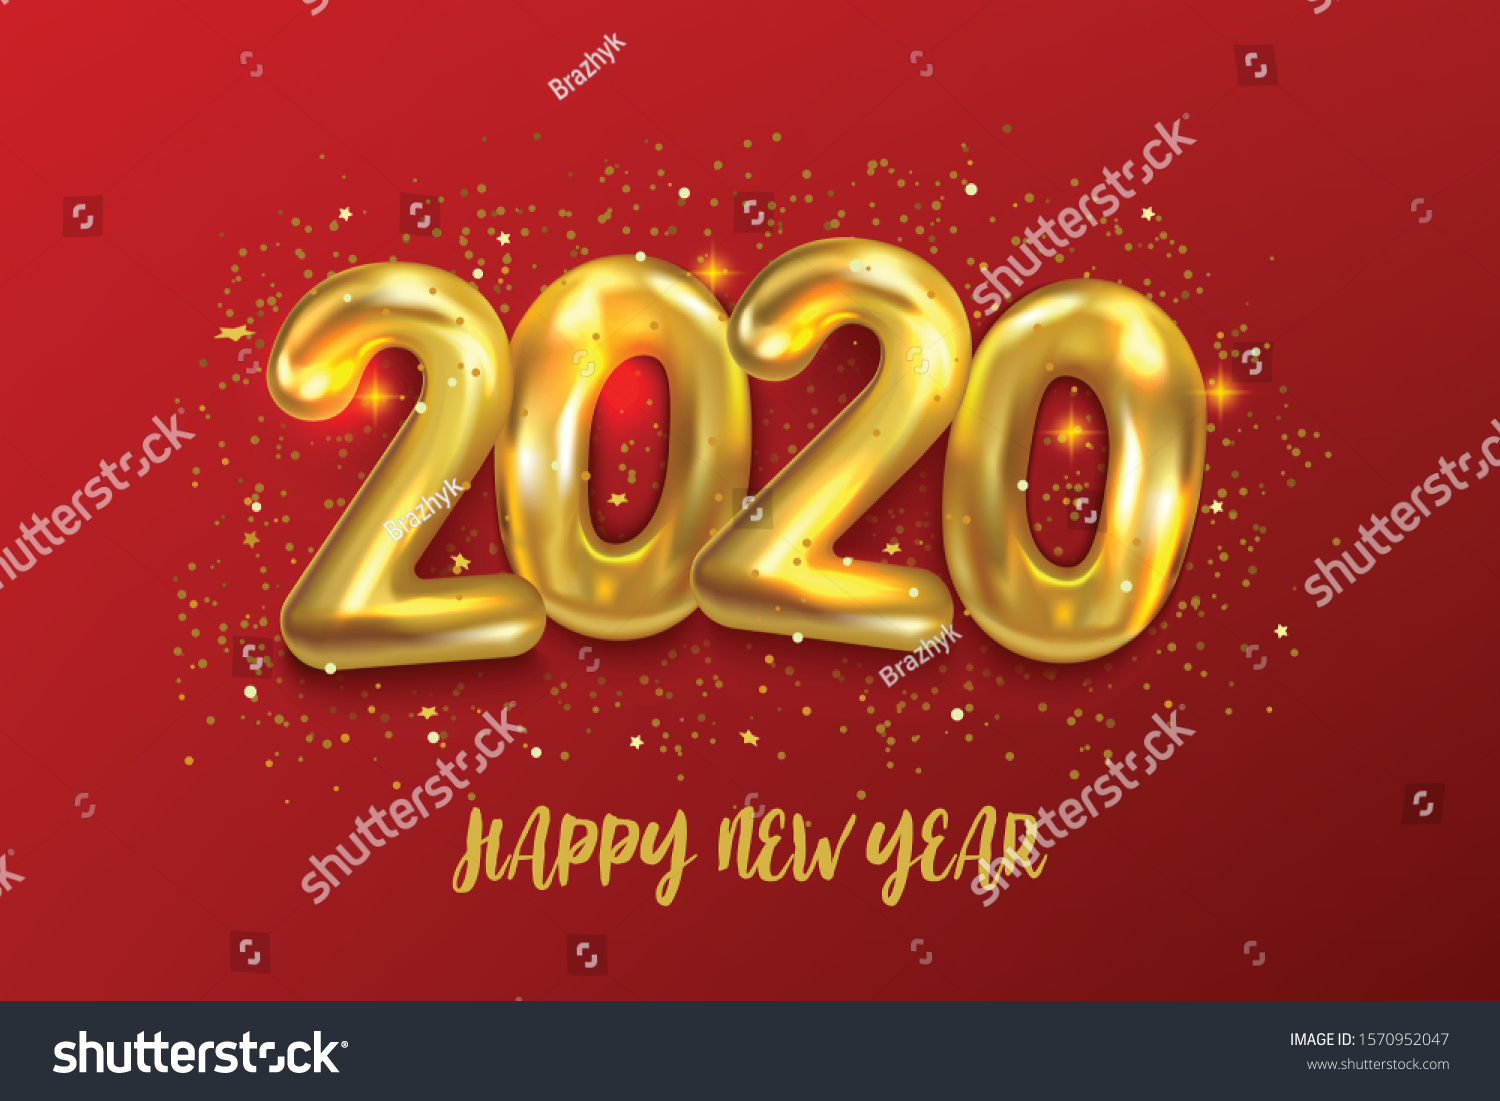 Happy New 2020 Year. Holiday vector illustration of metallic golden balloons numbers 2020. Festive poster or banner design #1570952047